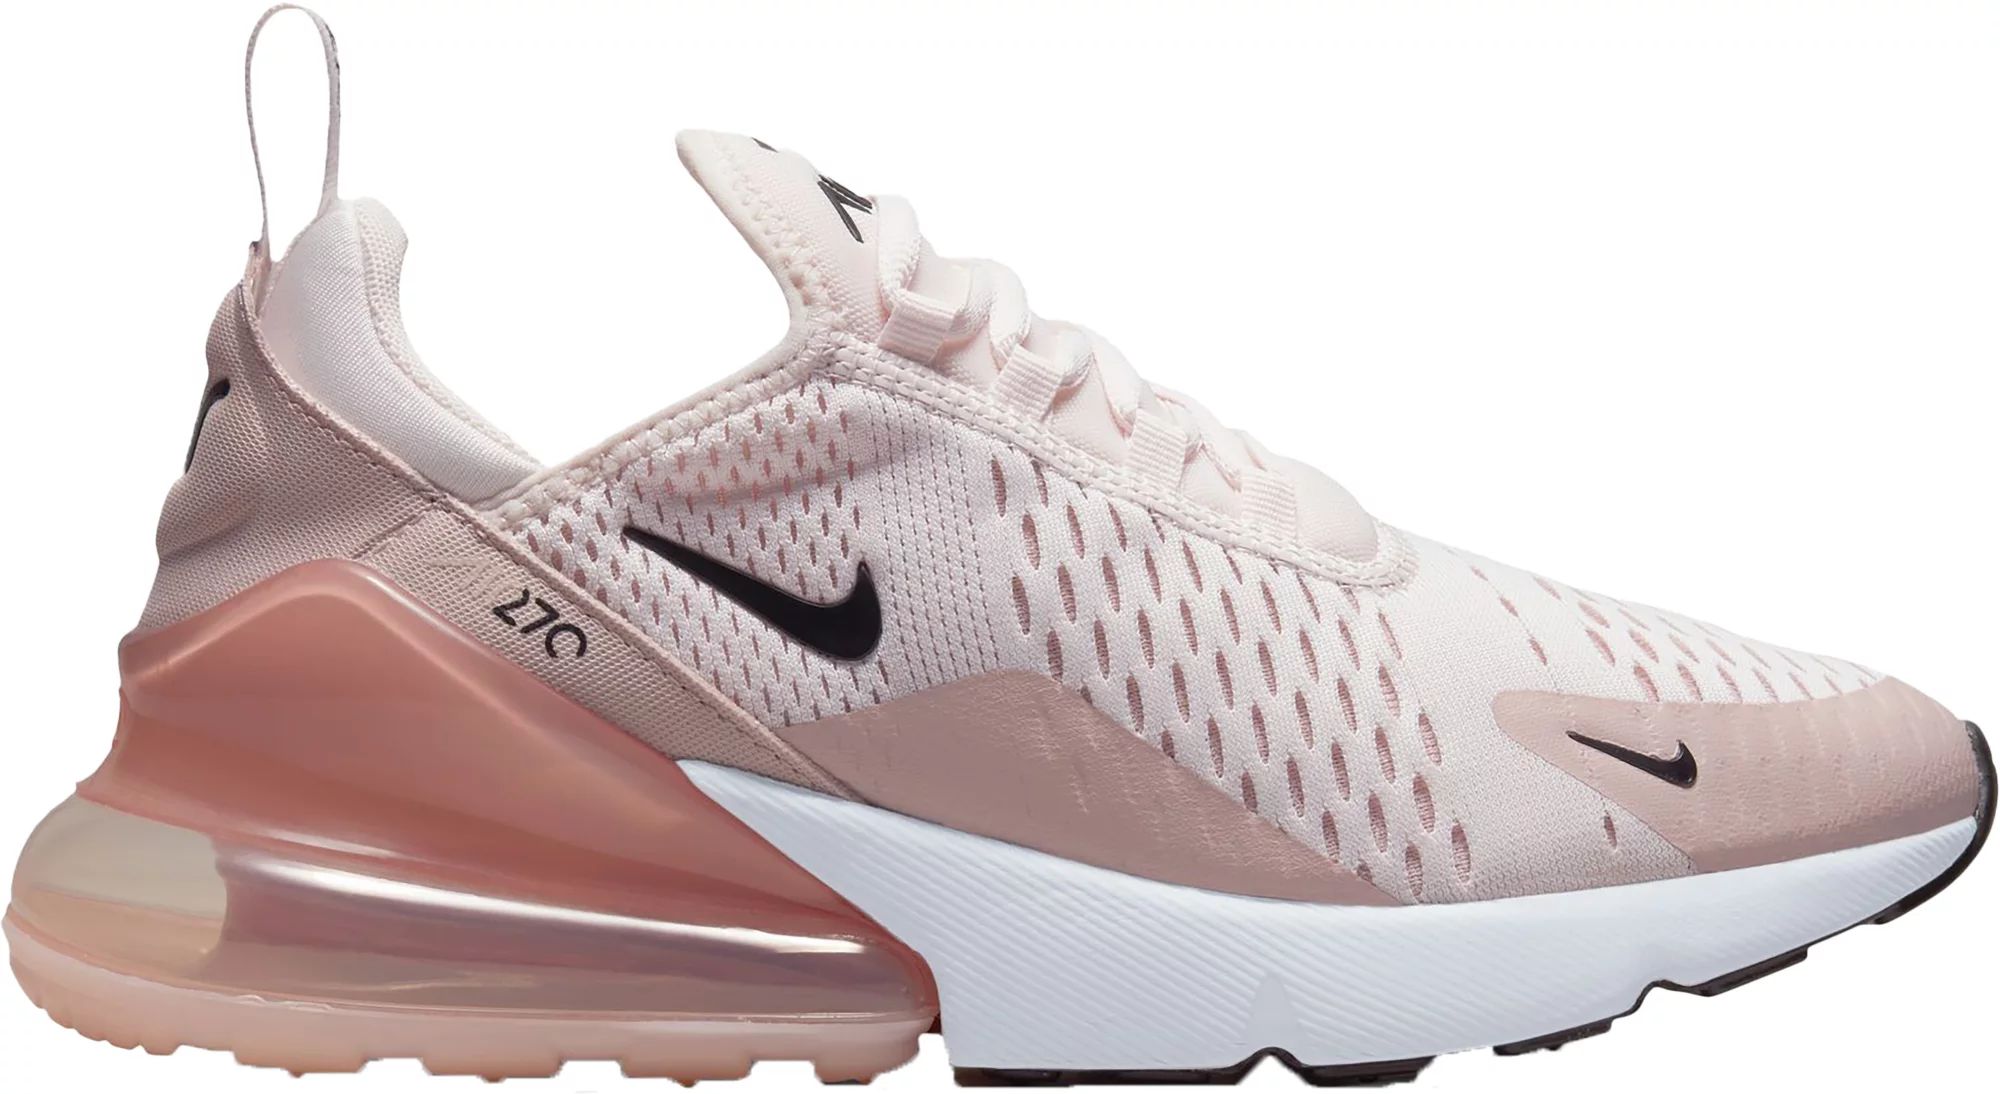 Nike Women's Air Max 270 Shoes, Size 10, Fresh Pink/Black | Dick's Sporting Goods